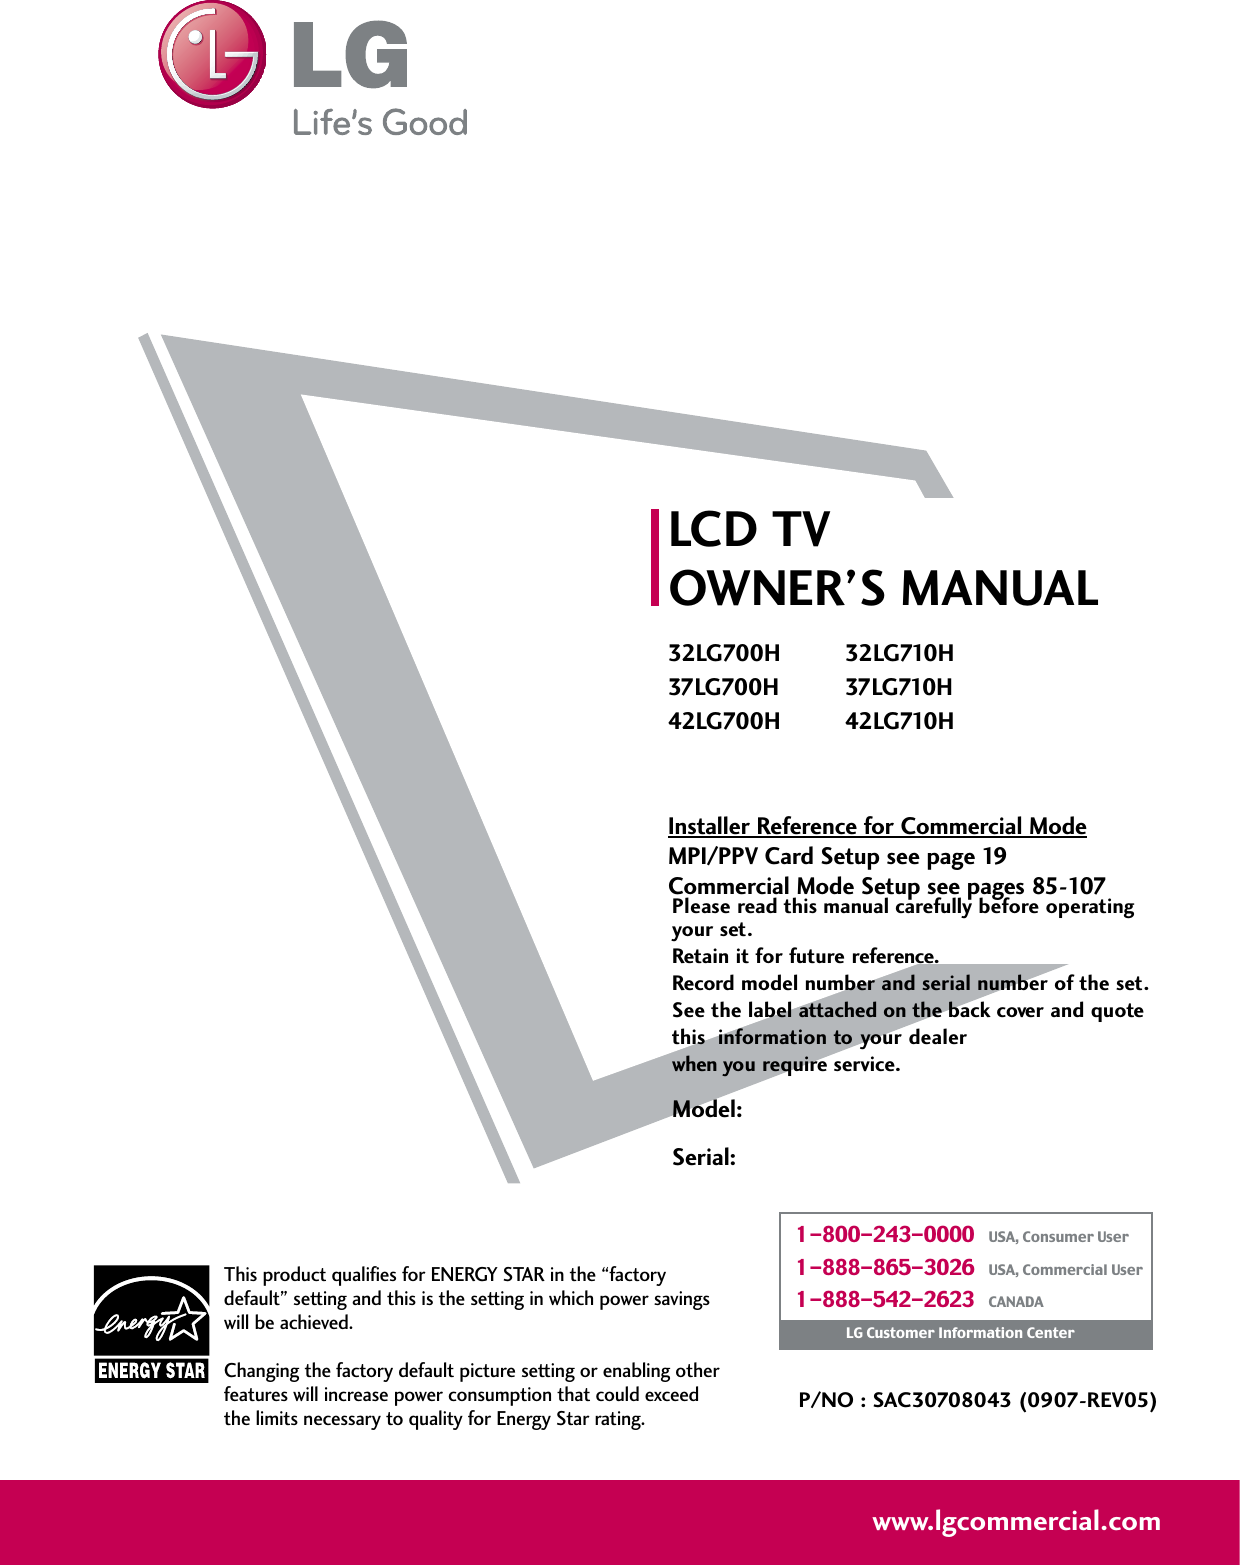 Please read this manual carefully before operatingyour set. Retain it for future reference.Record model number and serial number of the set. See the label attached on the back cover and quote this  information to your dealer when you require service.LCD TVOWNER’S MANUAL32LG700H 32LG710H37LG700H 37LG710H42LG700H 42LG710HInstaller Reference for Commercial ModeMPI/PPV Card Setup see page 19Commercial Mode Setup see pages 85-107P/NO : SAC30708043 (0907-REV05)www.lgcommercial.comThis product qualifies for ENERGY STAR in the “factorydefault” setting and this is the setting in which power savingswill be achieved.Changing the factory default picture setting or enabling otherfeatures will increase power consumption that could exceedthe limits necessary to quality for Energy Star rating.1-800-243-0000   USA, Consumer User1-888-865-3026   USA, Commercial User1-888-542-2623   CANADALG Customer Information CenterModel:Serial: